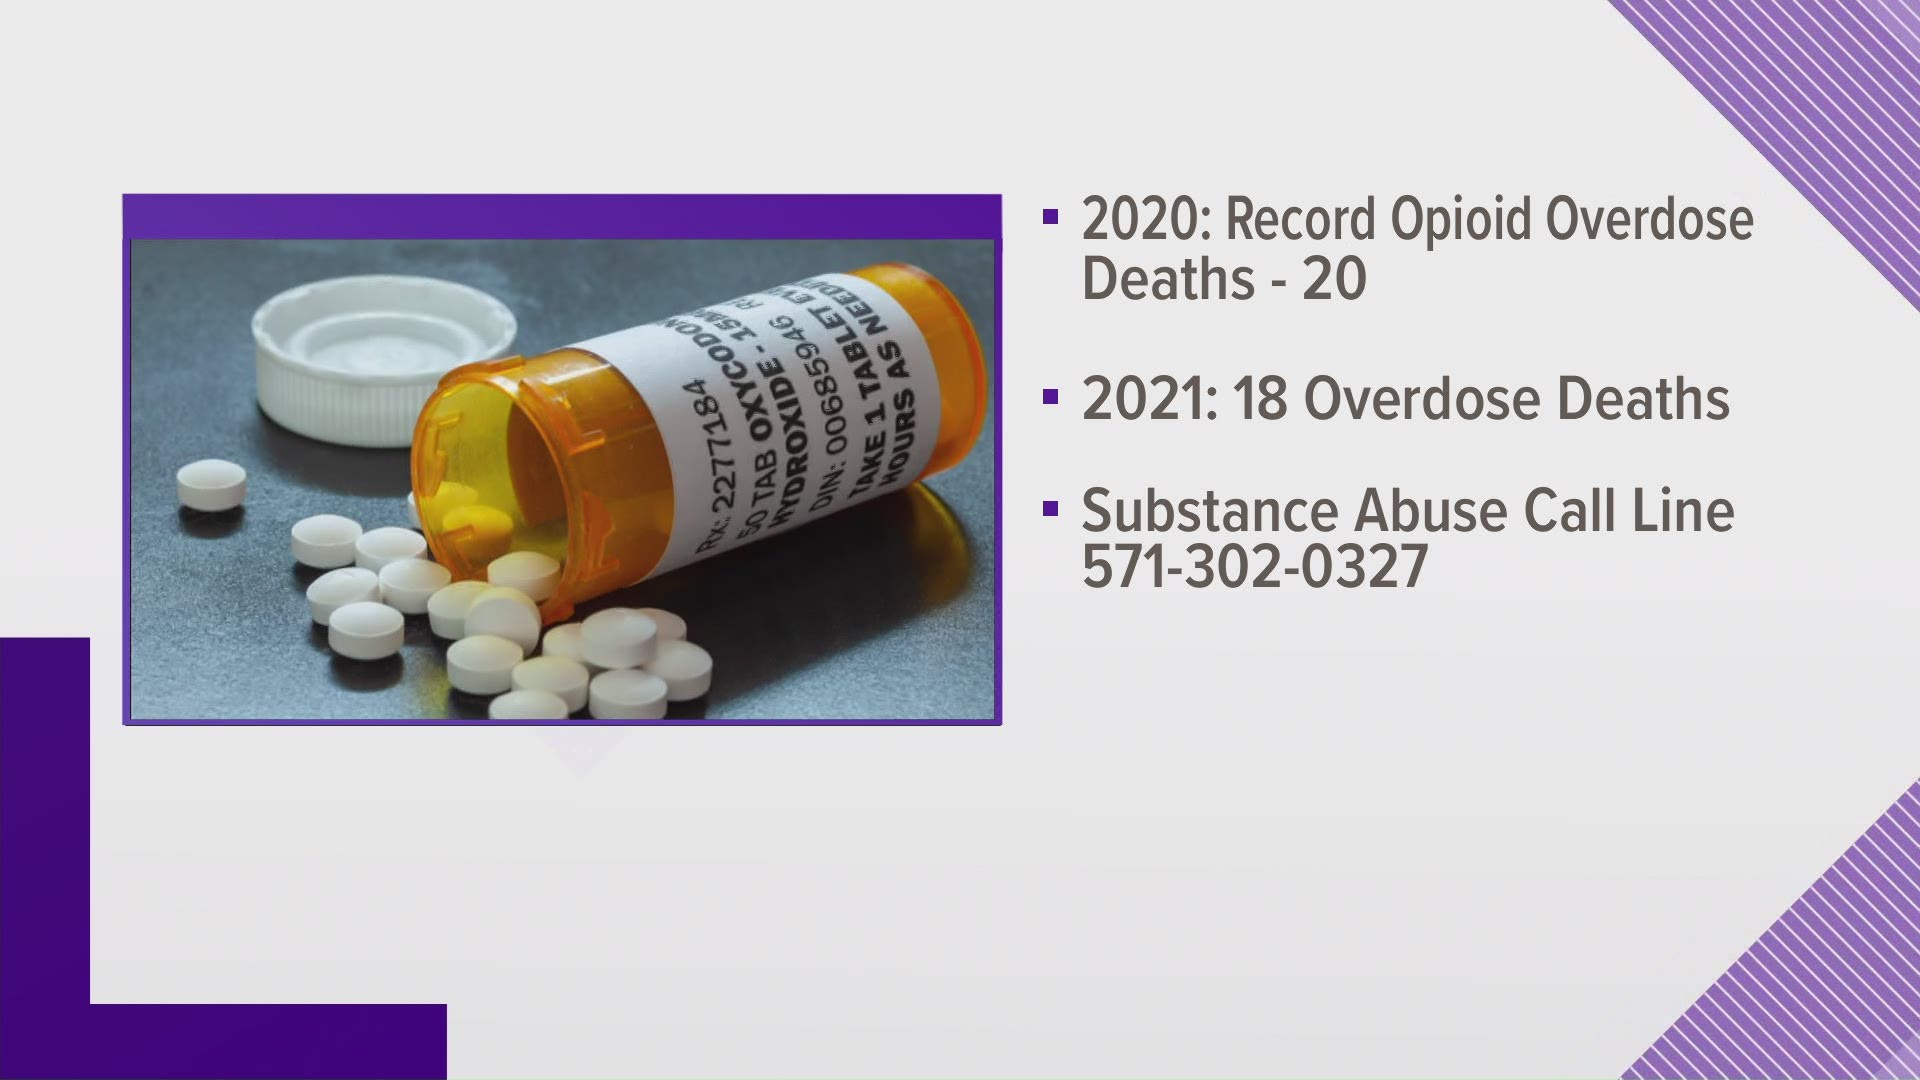 Arlington County Police say the county is on track to surpass 2020's record high of fatal opioid overdoses this year.